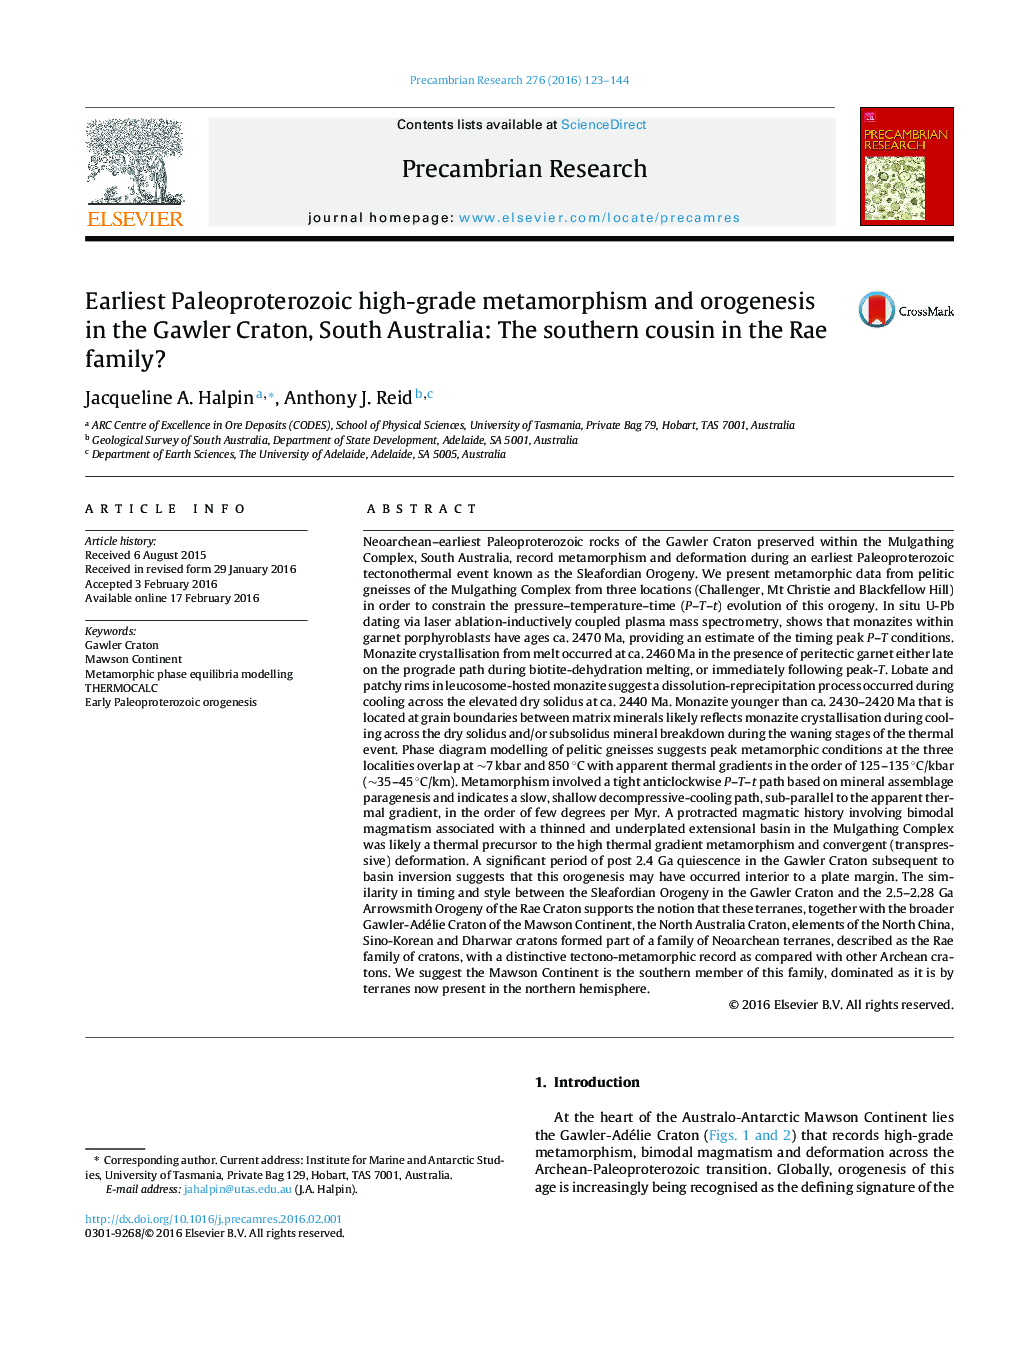 Earliest Paleoproterozoic high-grade metamorphism and orogenesis in the Gawler Craton, South Australia: The southern cousin in the Rae family?